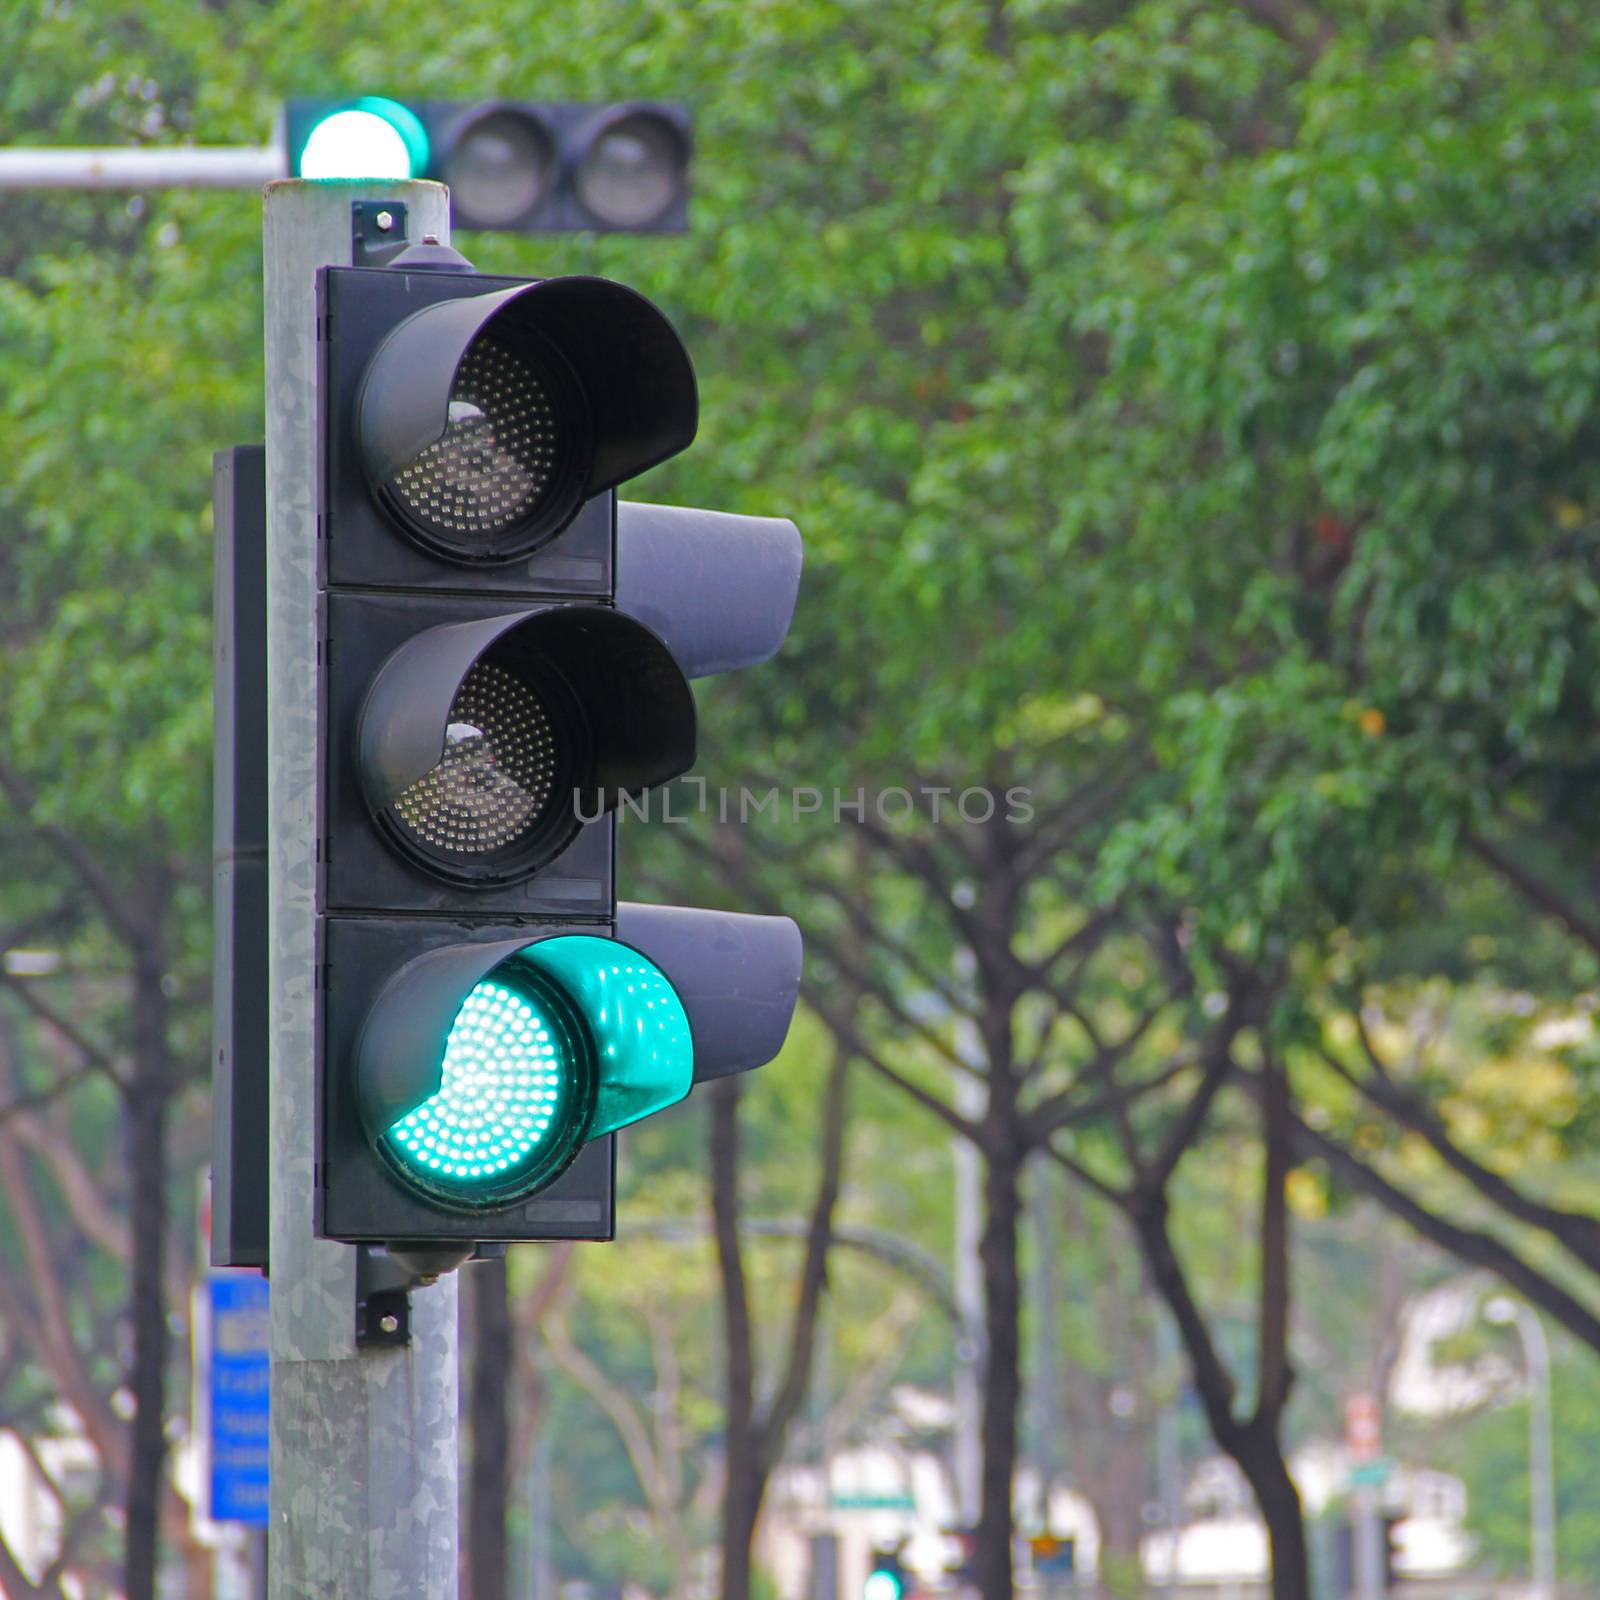 Traffic light while on the green signal